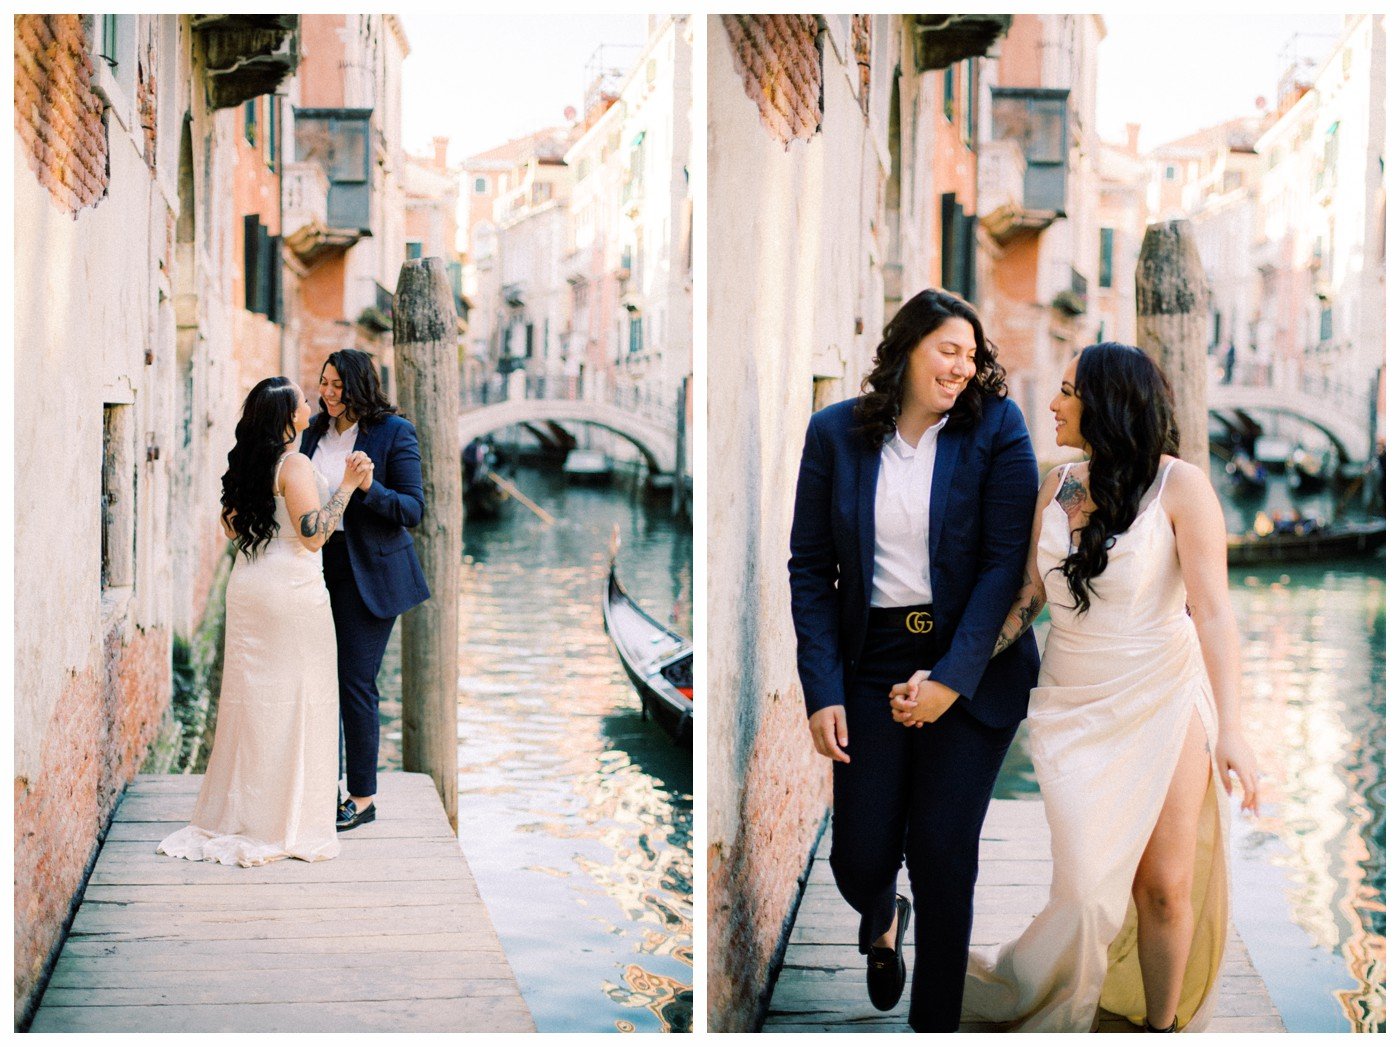 Same-sex Wedding and Couple Photography in Venice Italy — Venice photographer for your wedding, honeymoon or anniversary. image